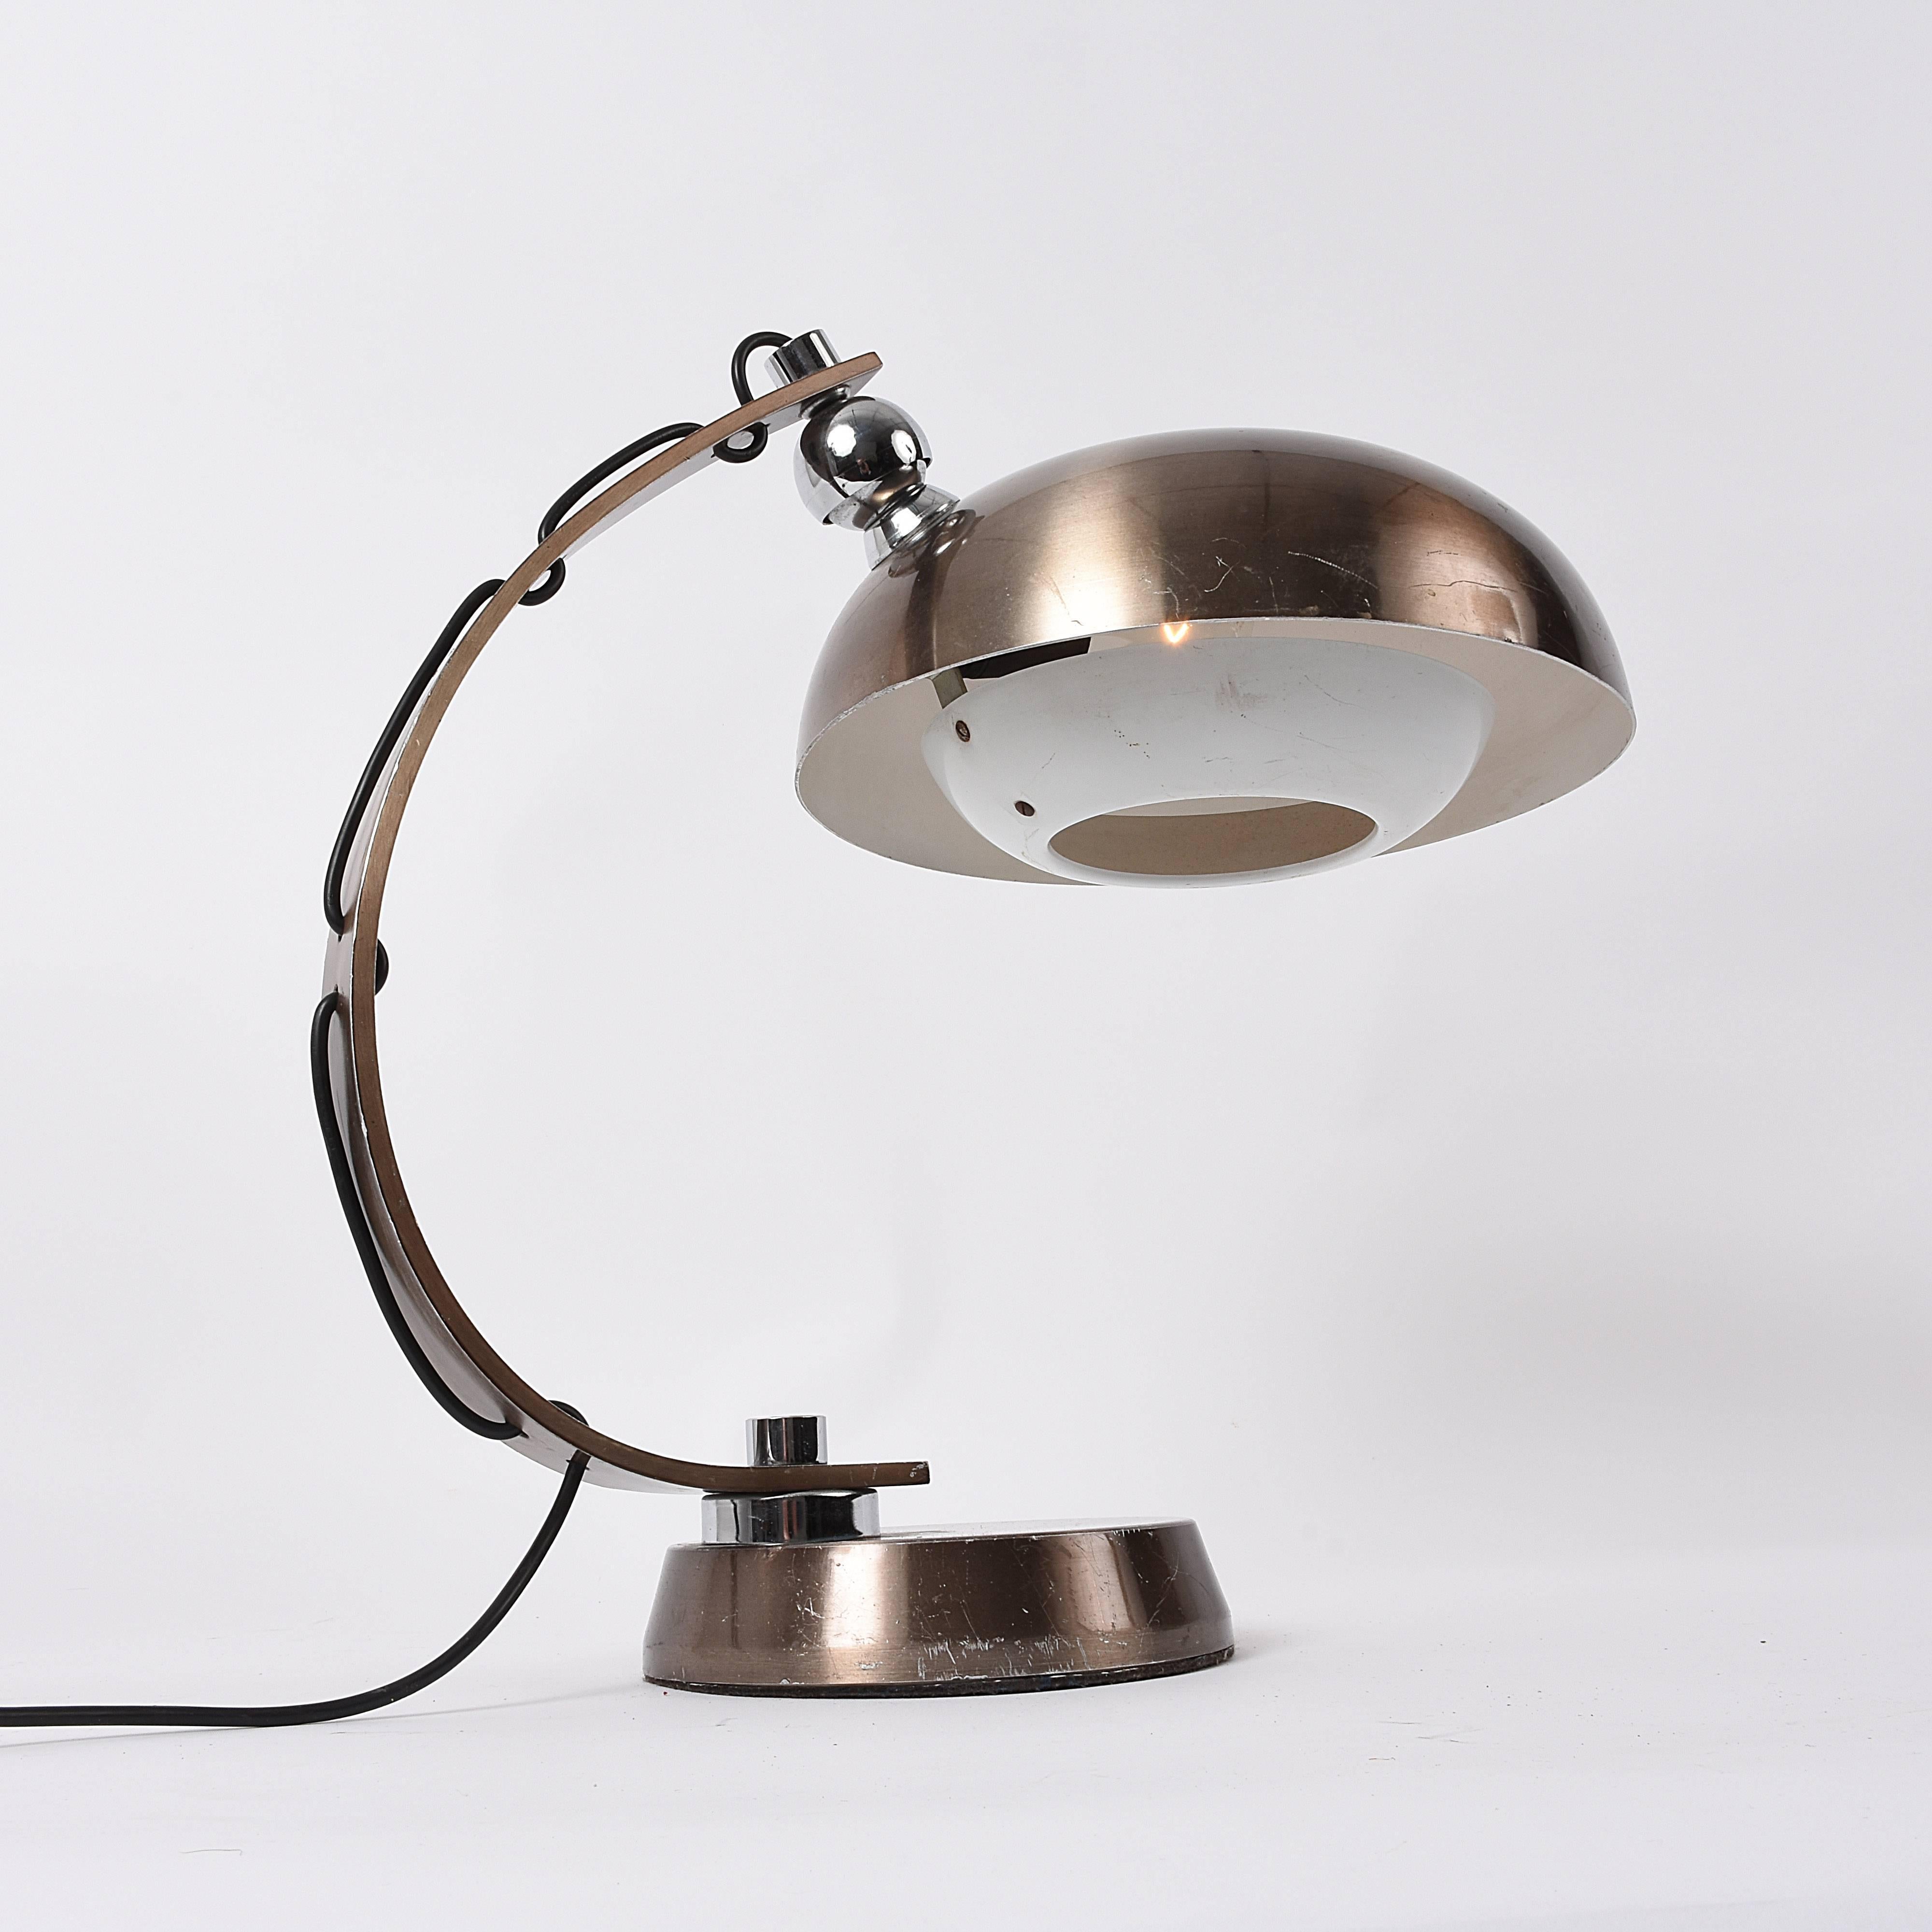 Metal Table Lamp in Brushed and Bronzed Aluminum 1970 Italian Attributed to Arredoluce